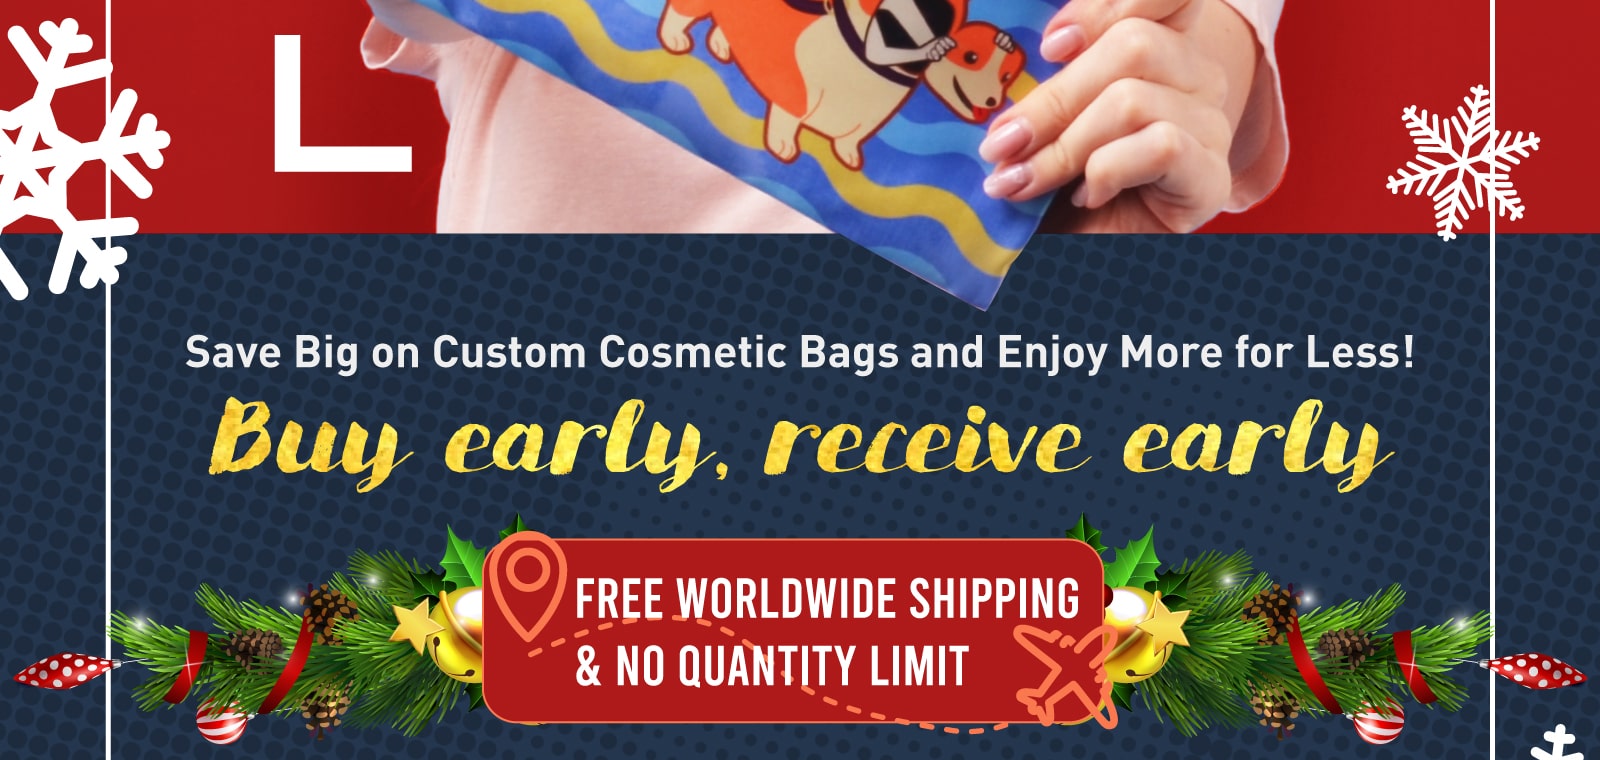 Crazy low prices! Custom Cosmetic Bags Starting at $4!